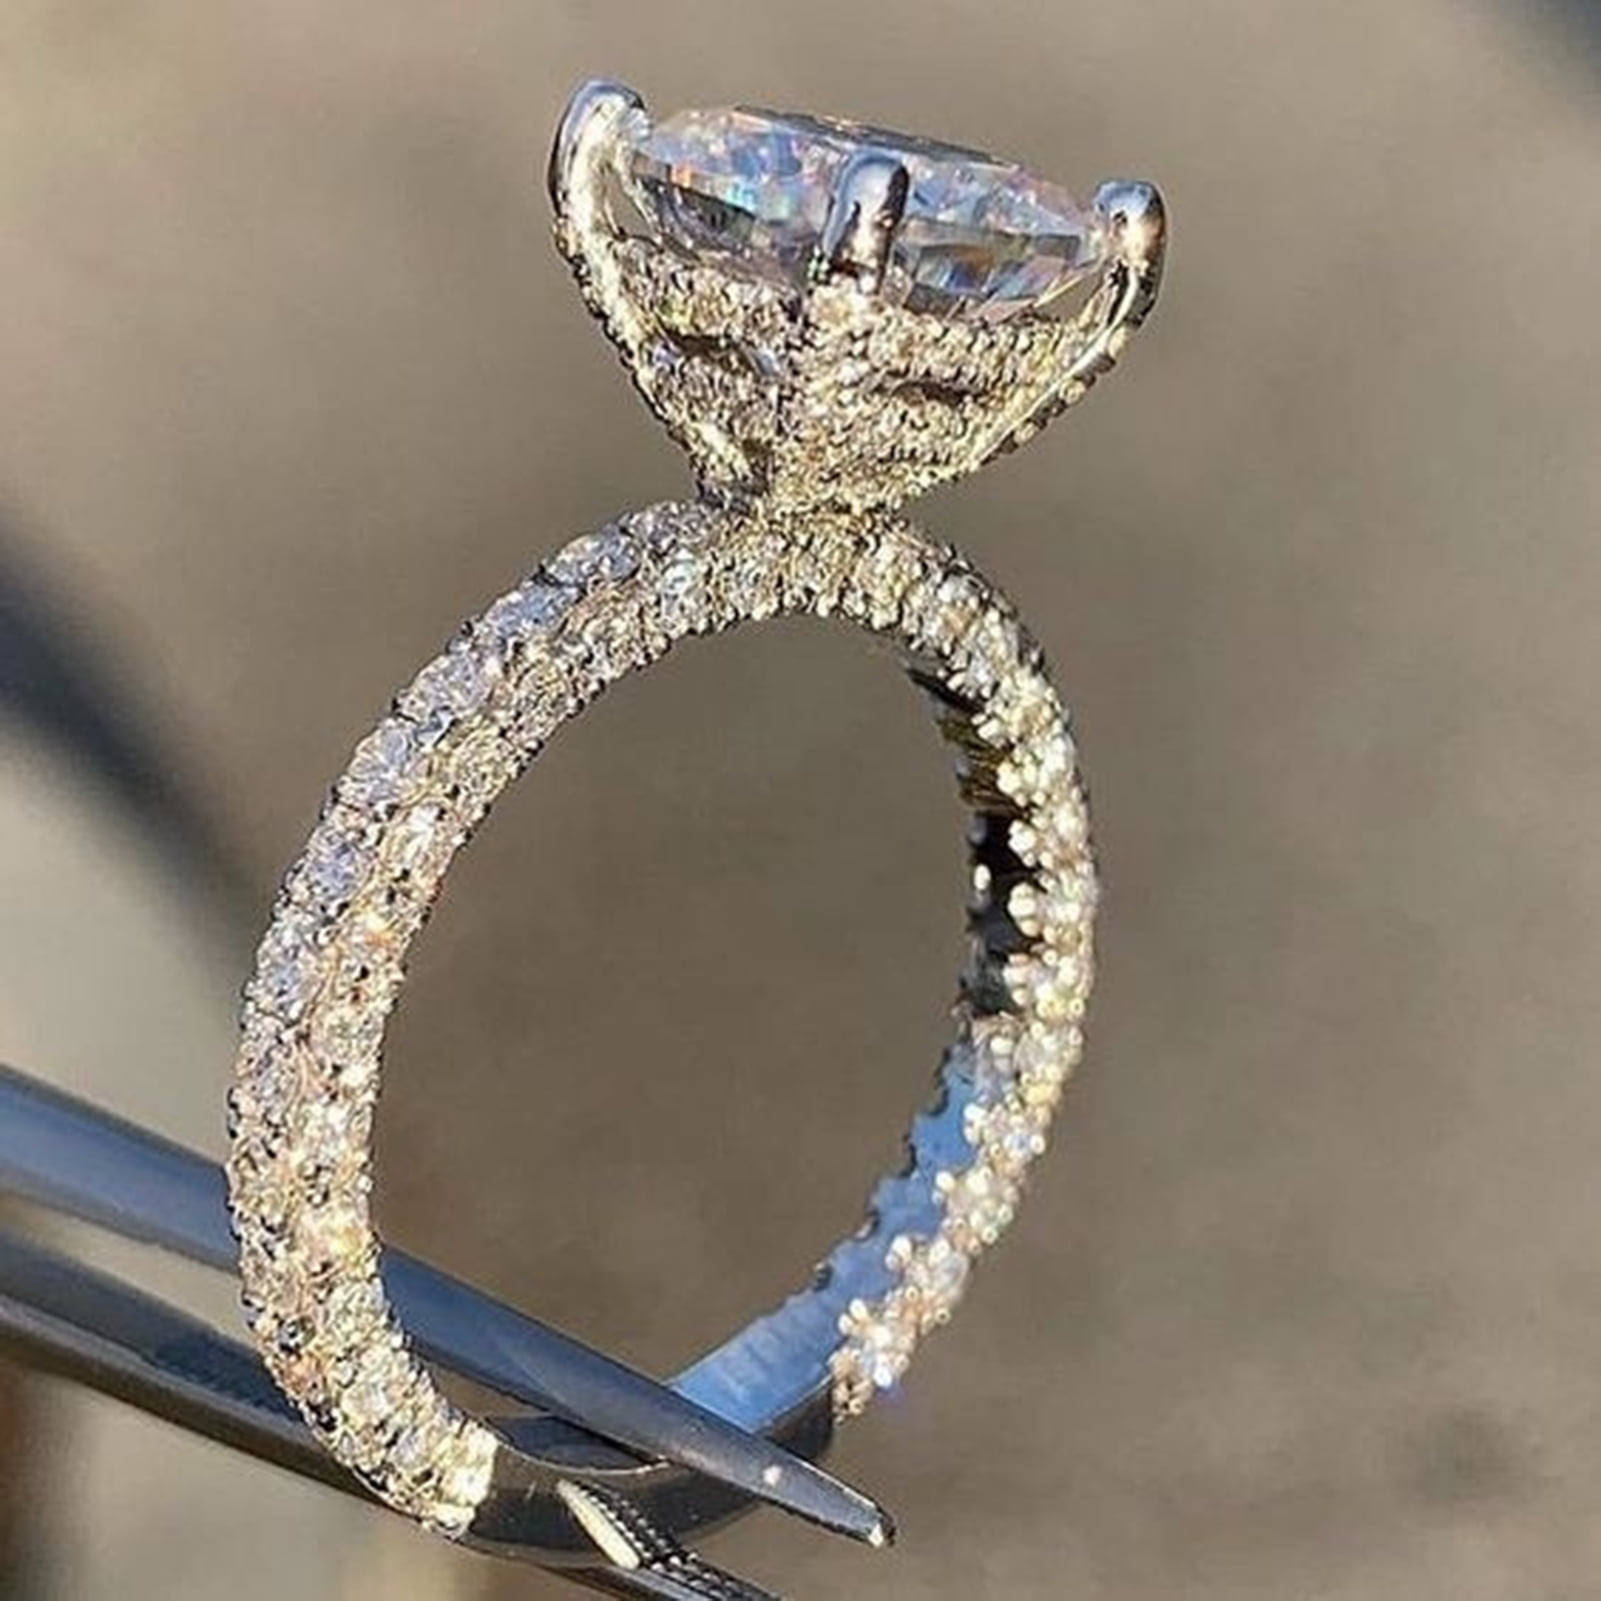 28 Engagement Rings To Send To Your Partner “Just In Case”